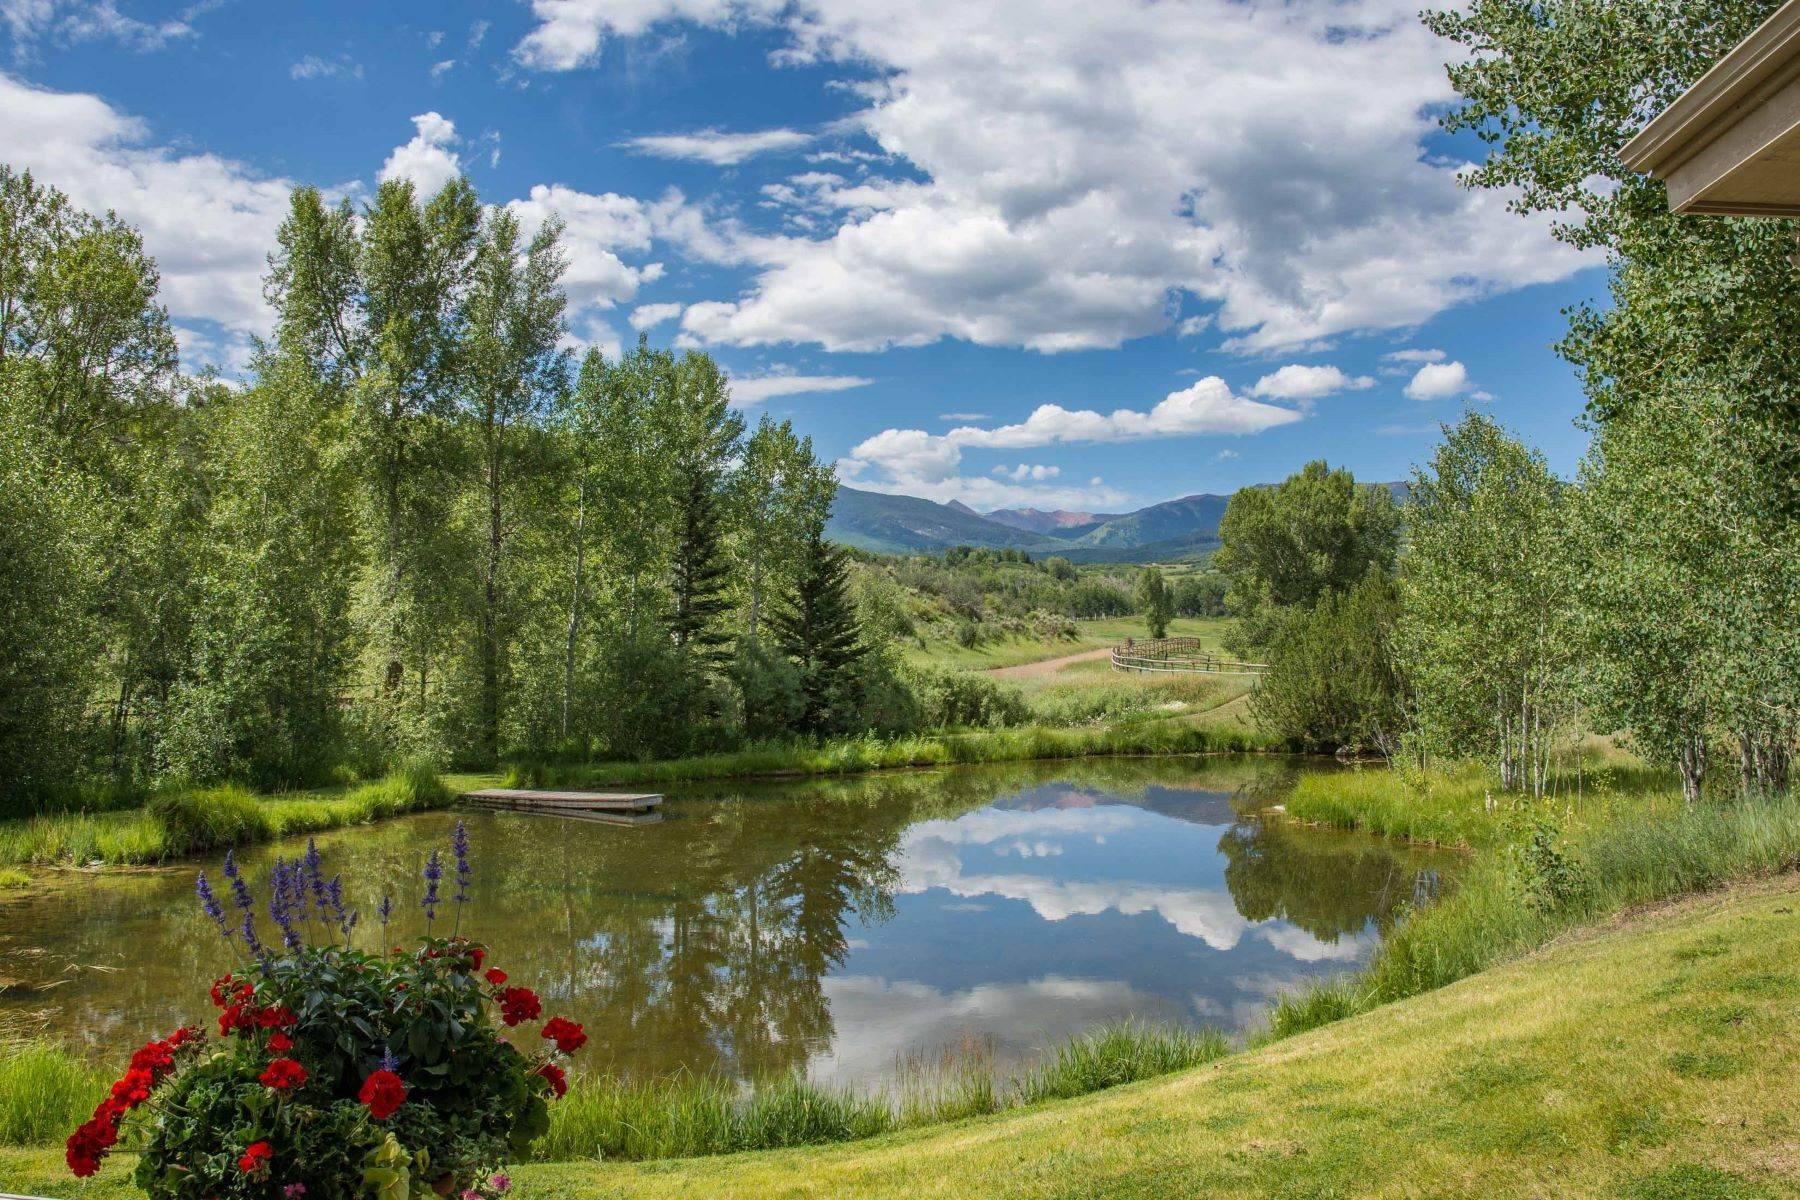 Farm and Ranch Properties for Sale at RARE and UNIQUE opportunity to own the heart of the renowned McCabe Ranch! 1321 Elk Creek & TBD McCabe Ranch Old Snowmass, Colorado 81654 United States